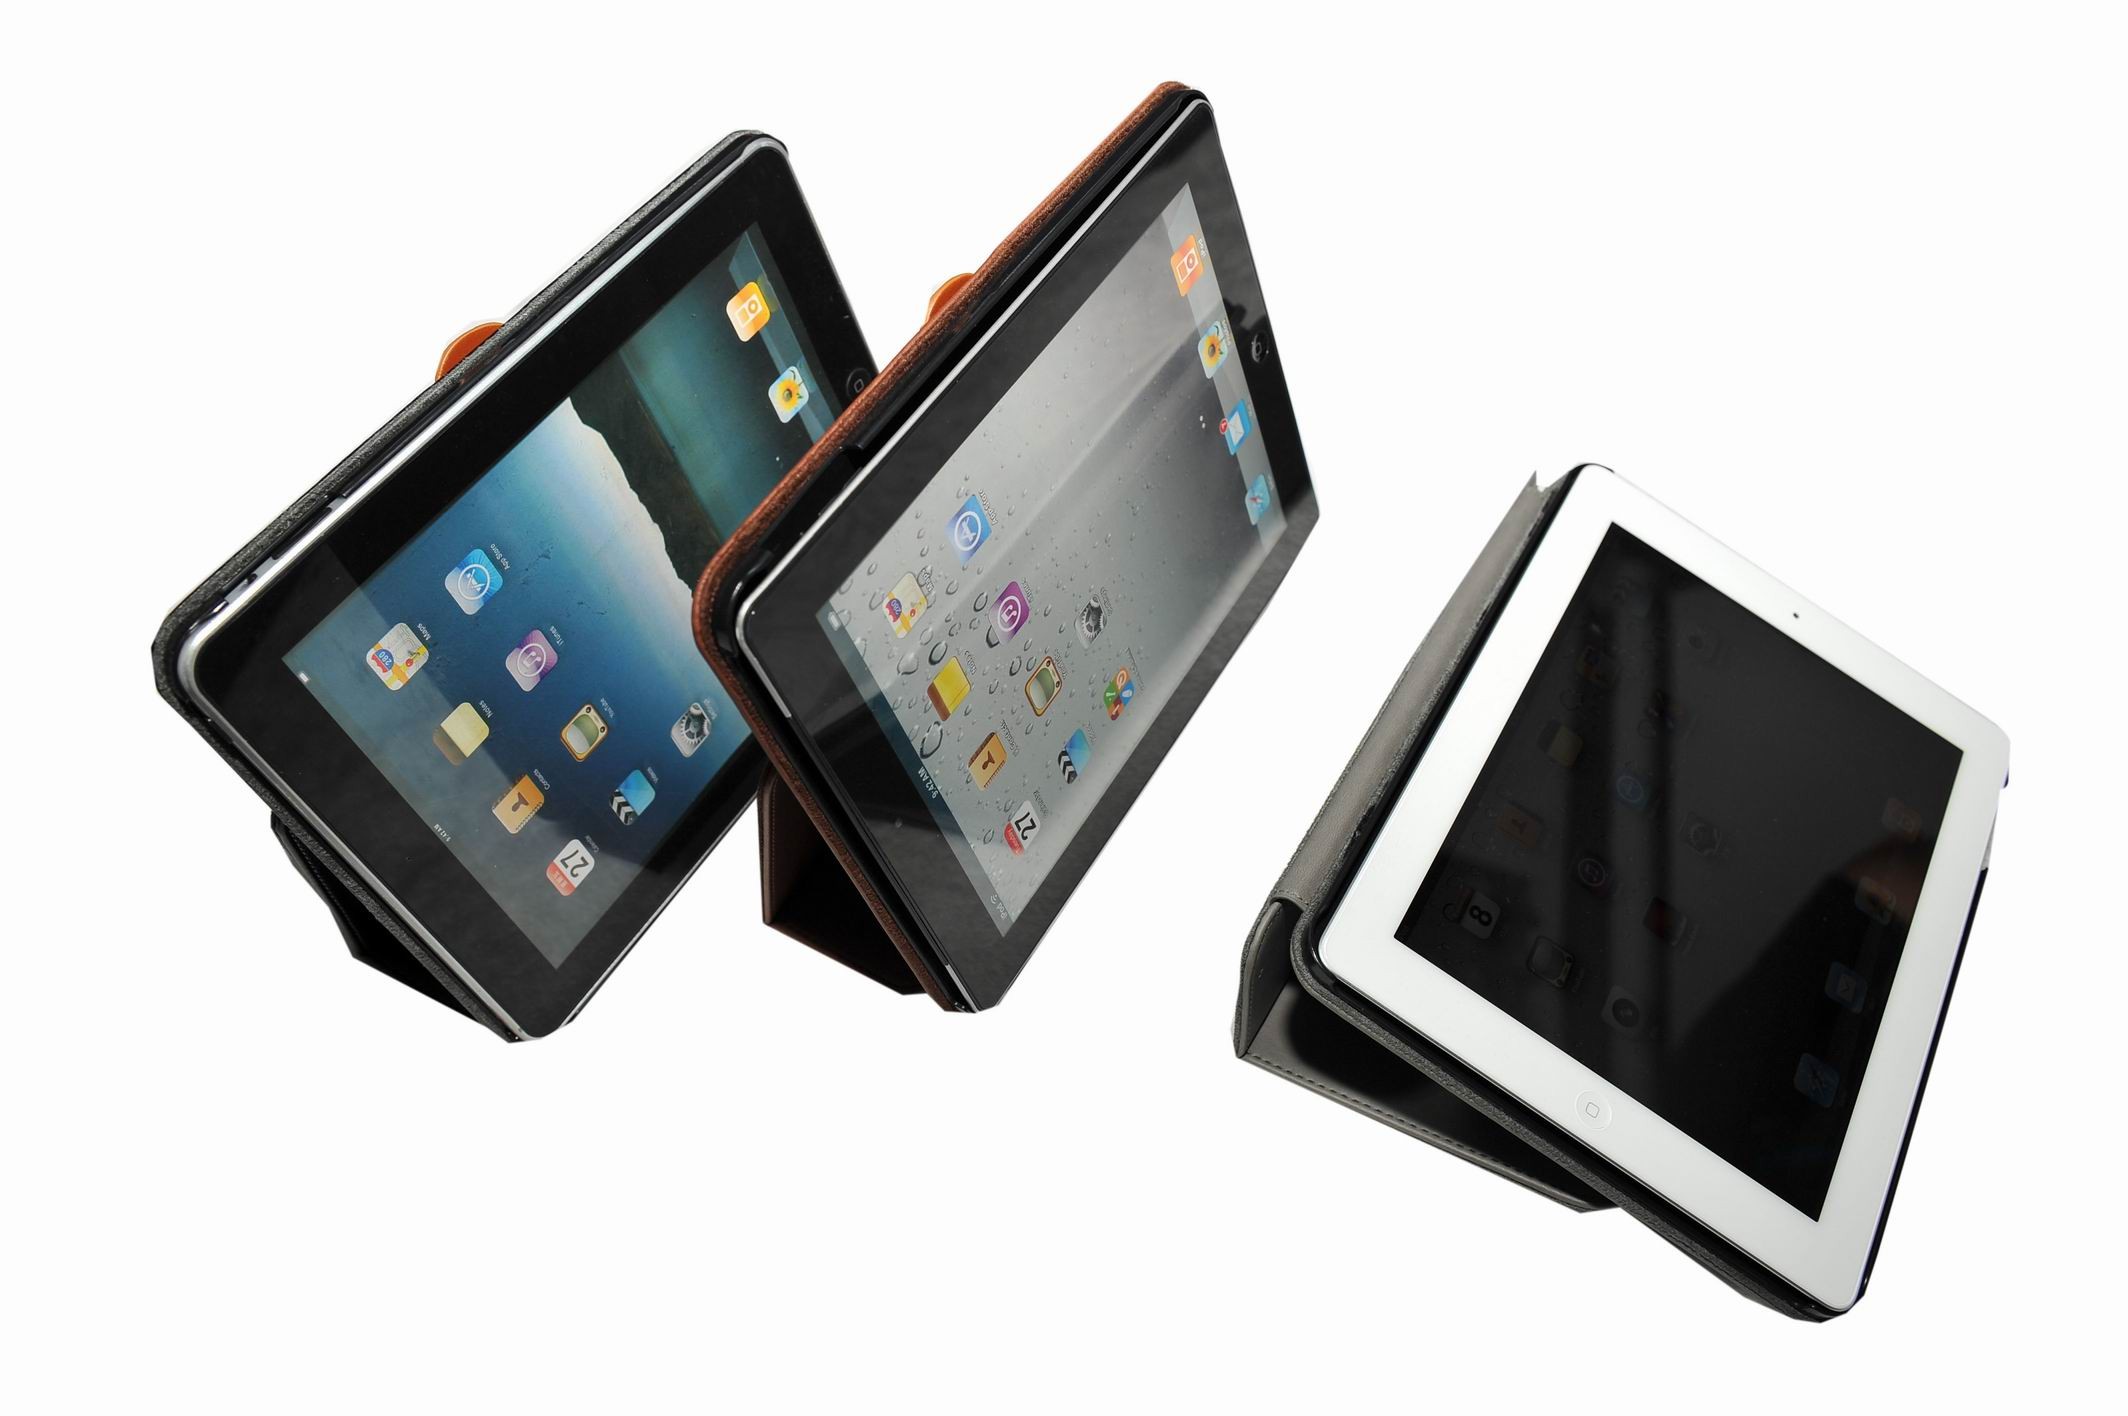 the hotest Ipad leather cases in 2011